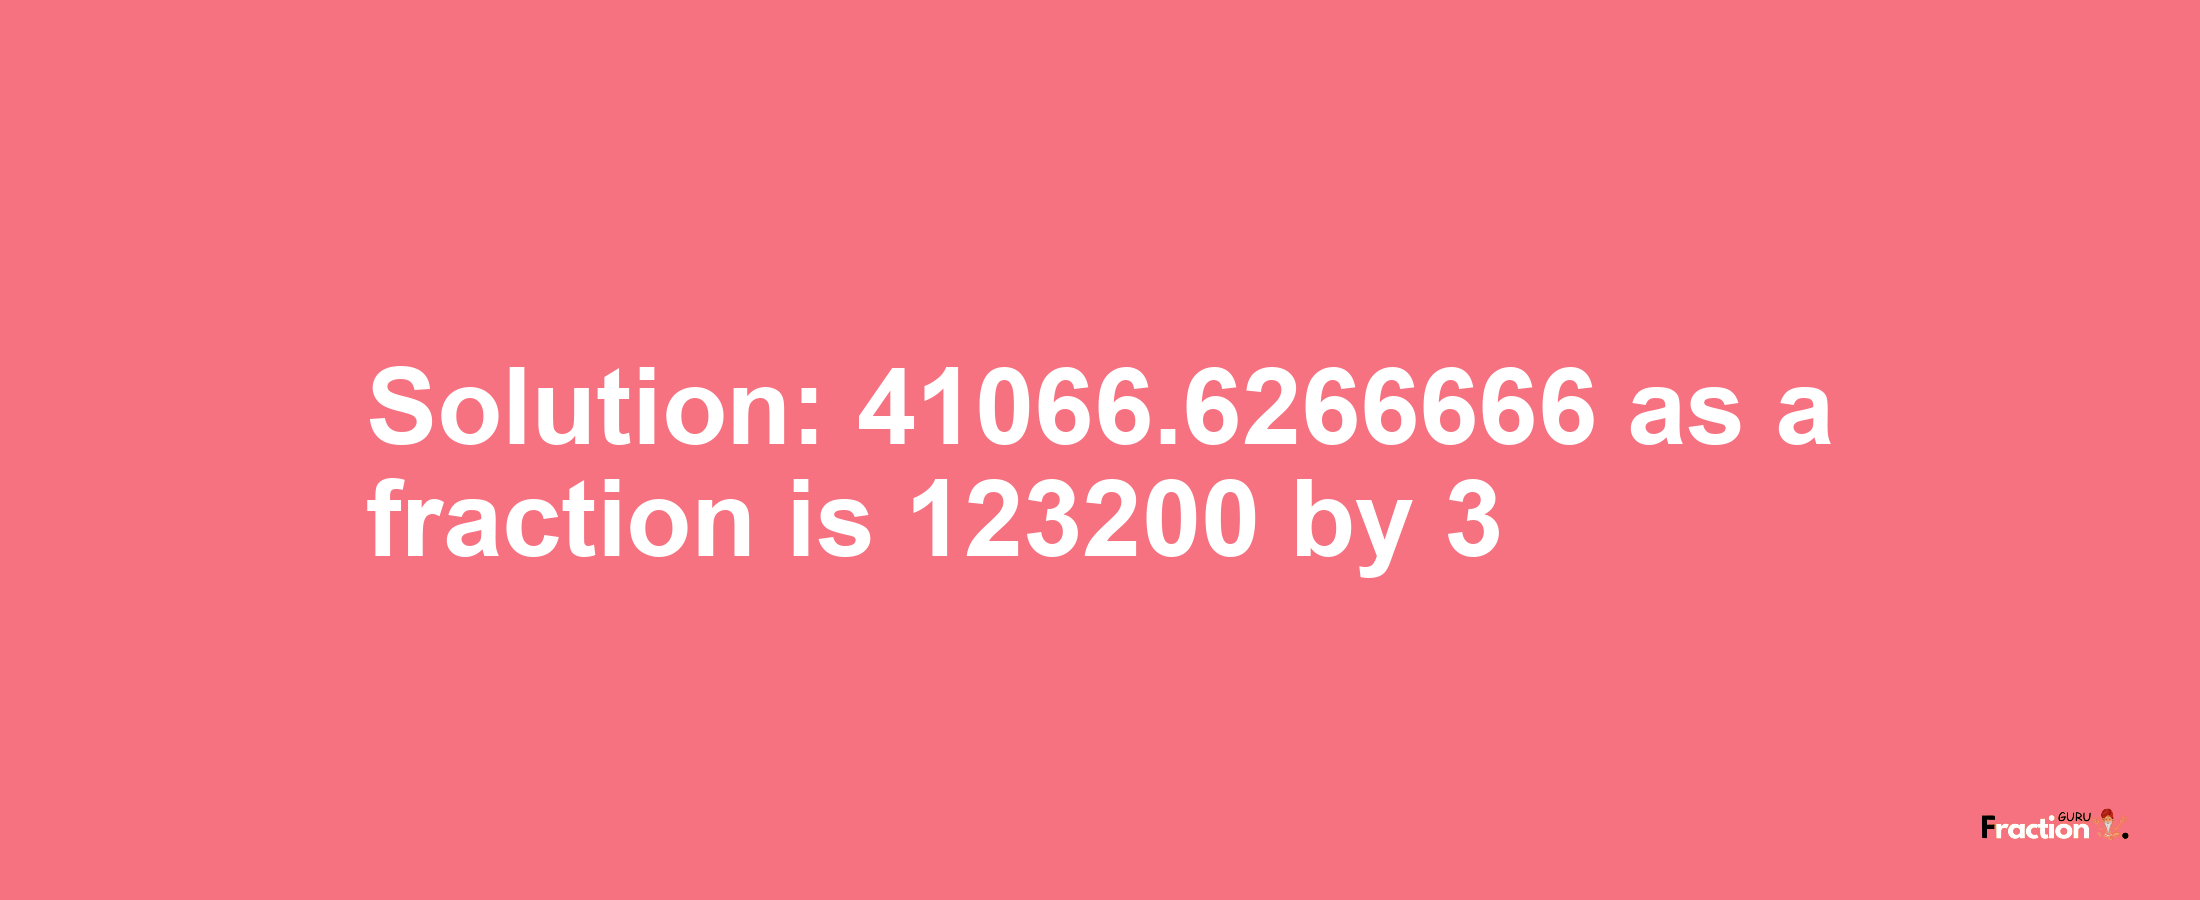 Solution:41066.6266666 as a fraction is 123200/3